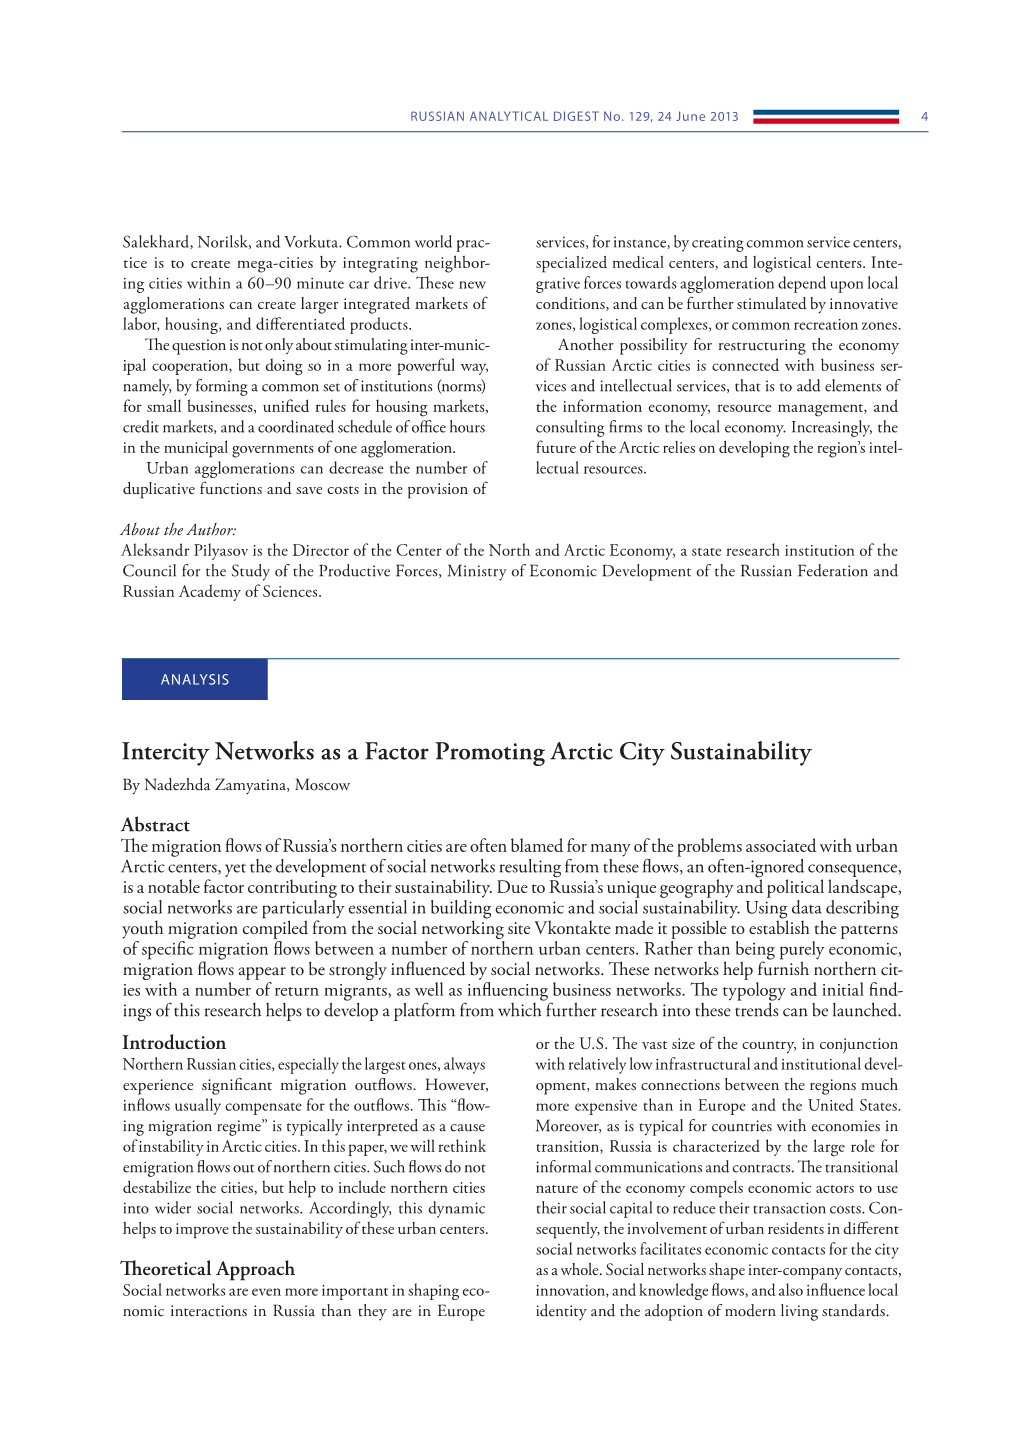 Intercity Networks As a Factor Promoting Arctic City Sustainability